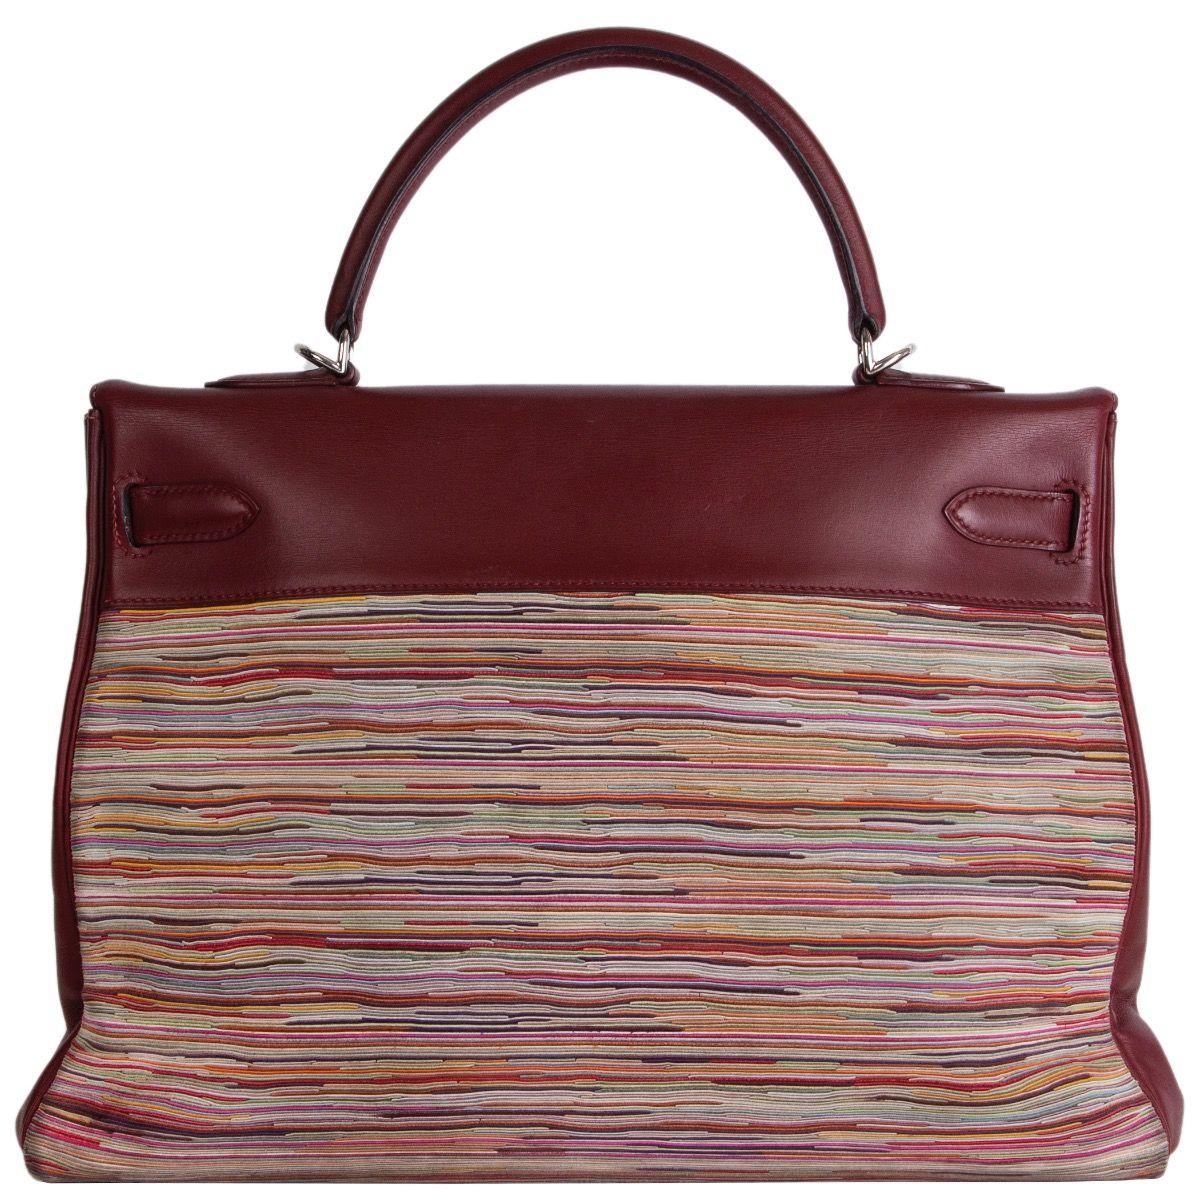 Hermes 'Kelly II 35 Retourne Vibrato' bag in Rouge H (burgund) Veau Evercalf leather with multicolor Vibrato panel. Rare limited edition. Lined in Rouge H Chèvre (goat skin) with two open pockets against the front and a zipper pocket against the